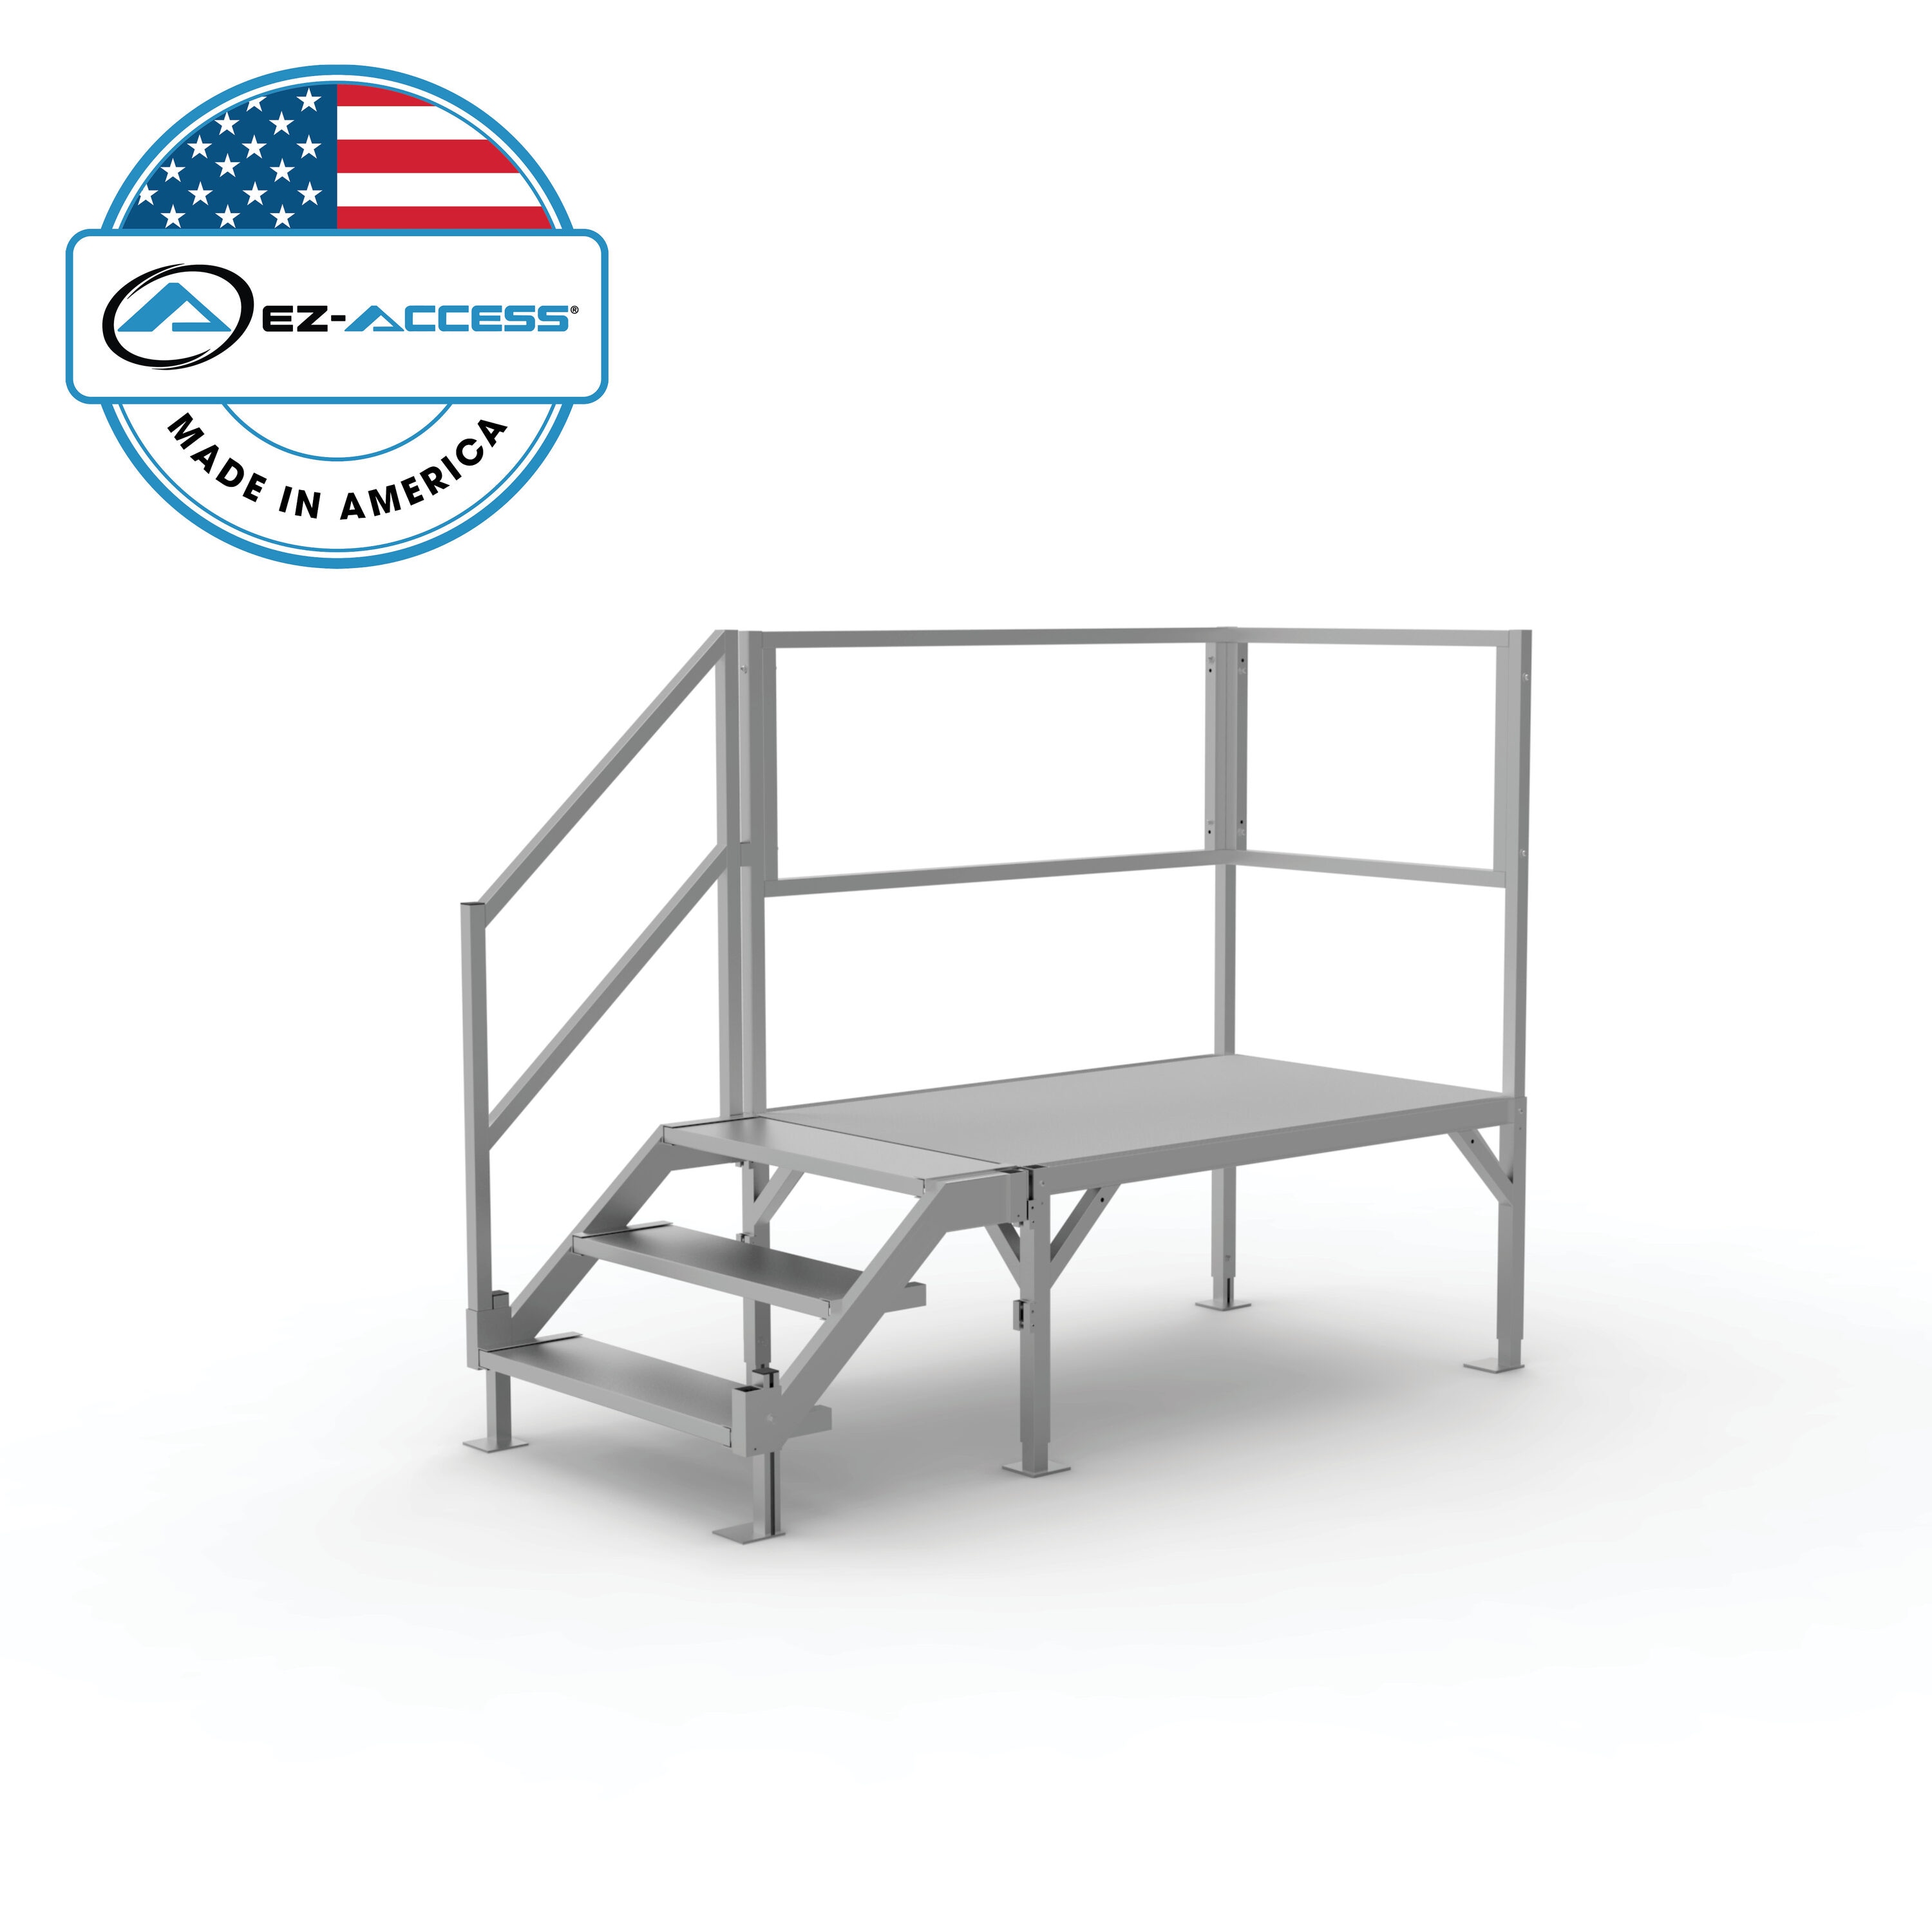 Pier Accessories - Stairs, Rail-less Stairs, Sunshade, Boxes